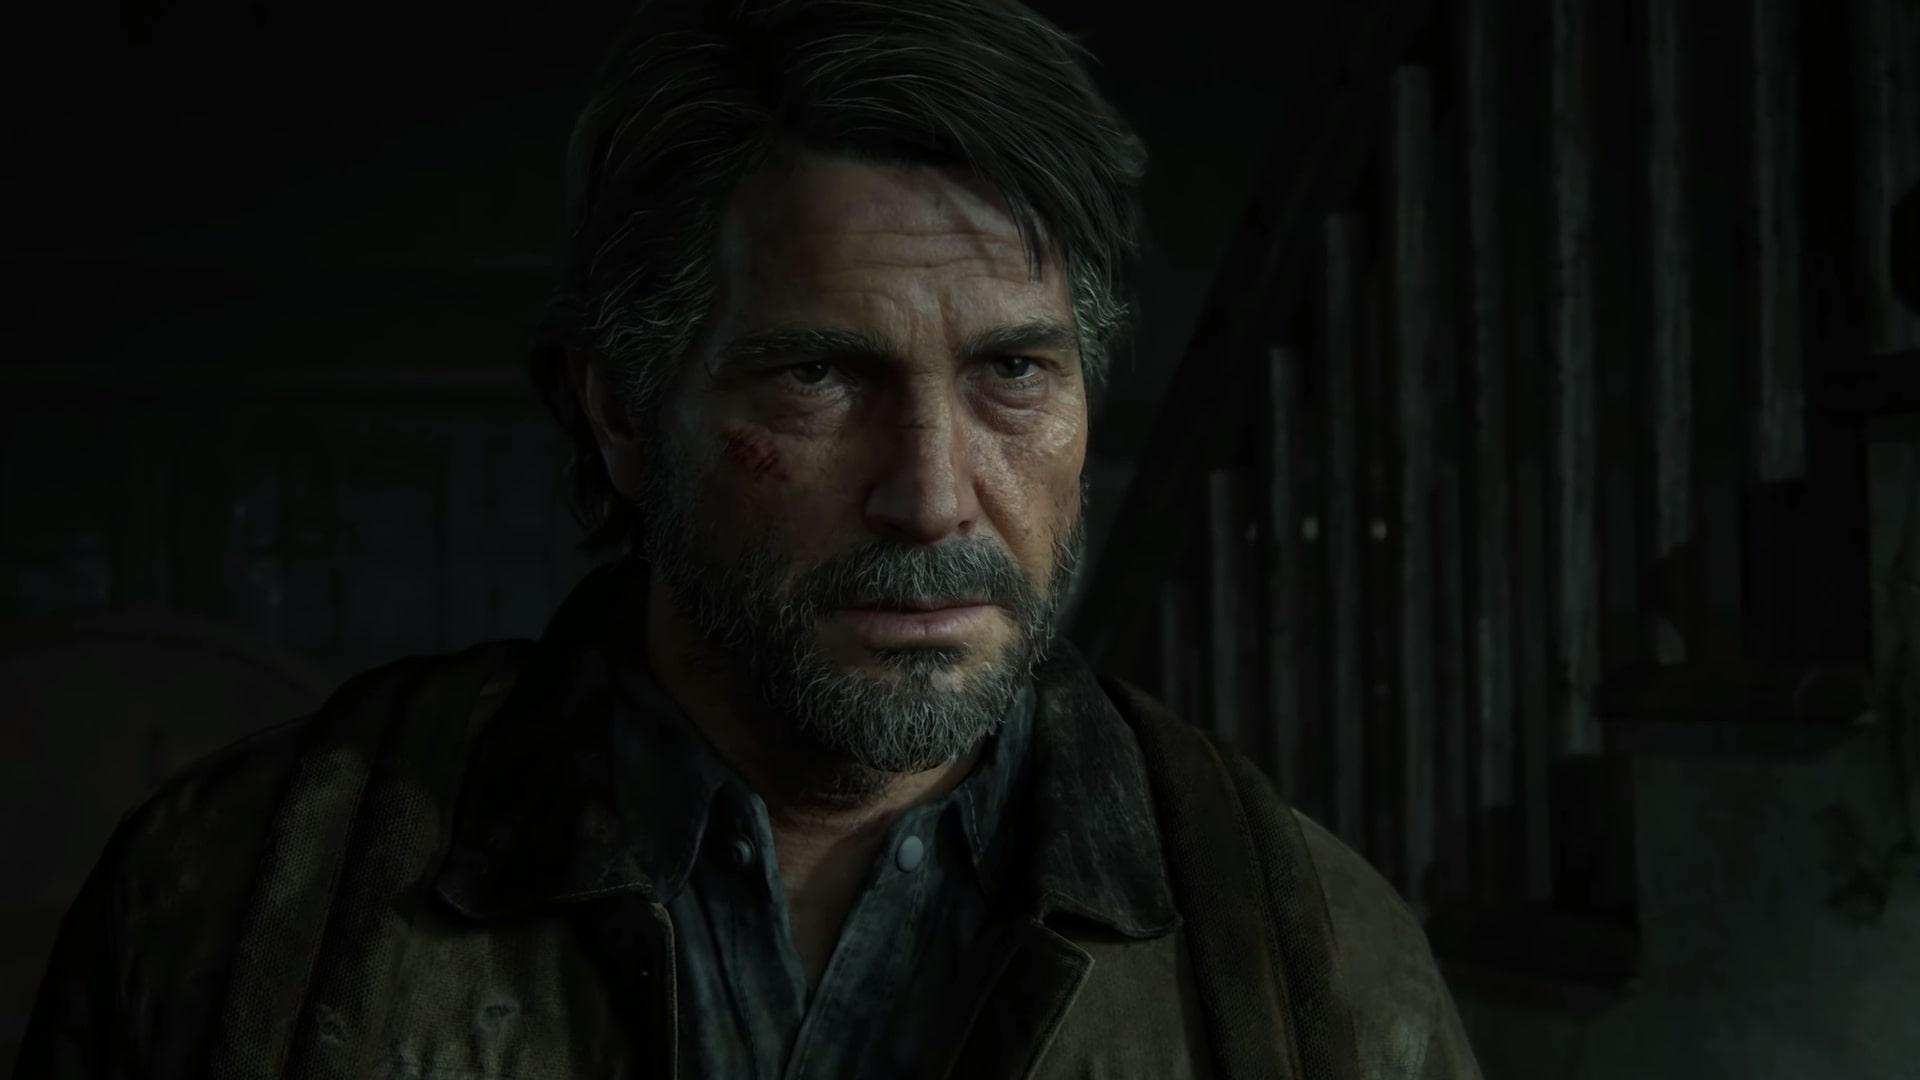 The Last of Us Part 2 has been rated, and it sounds as graphic as